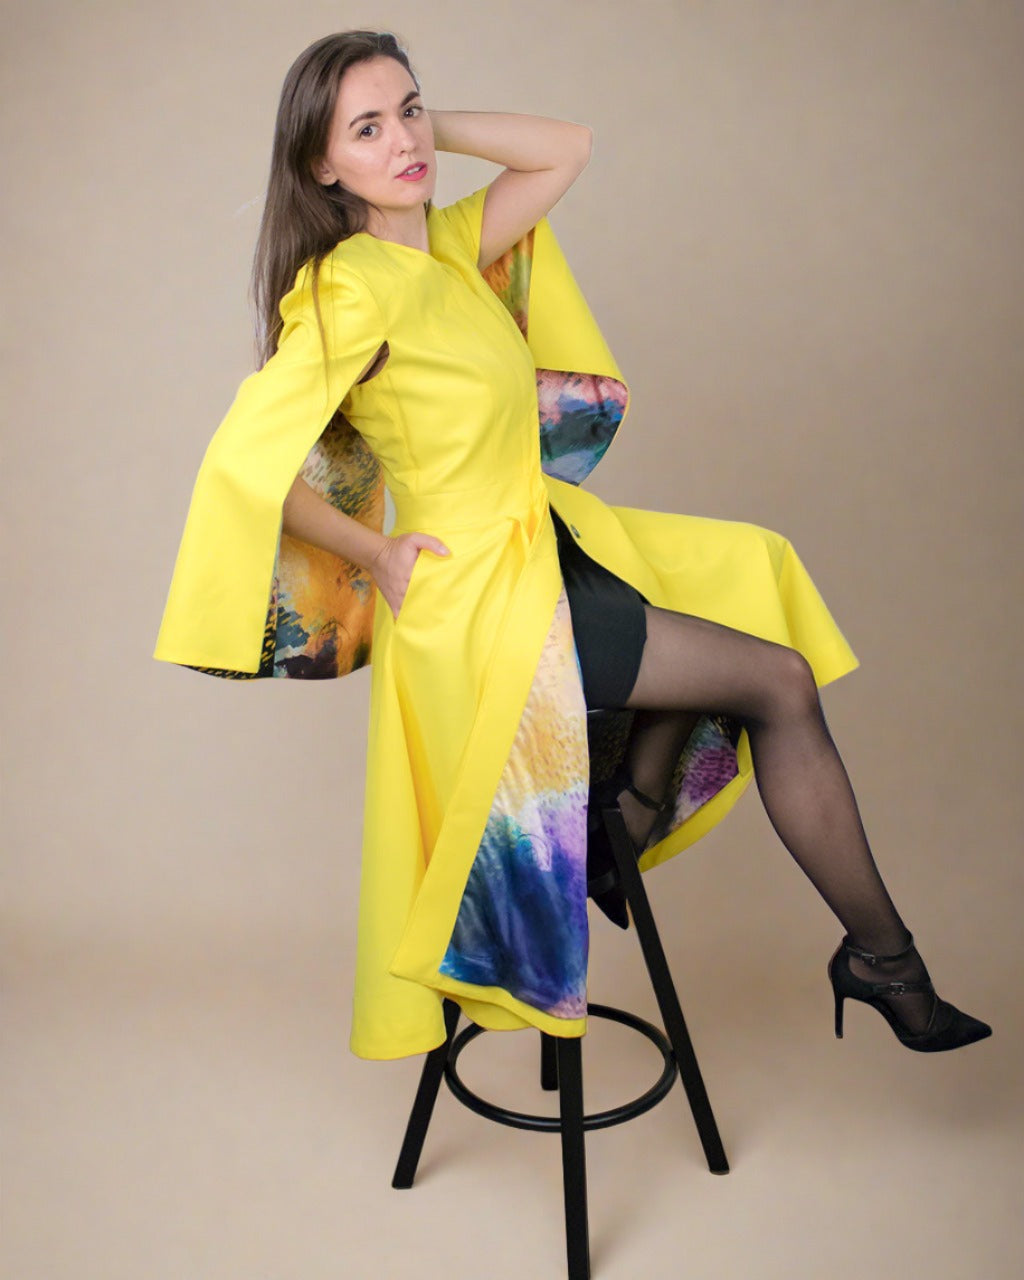 Longline yellow mustard stylish waterproof jacket cape raincoat ADKN ethically made in London from recycled plastic bottles